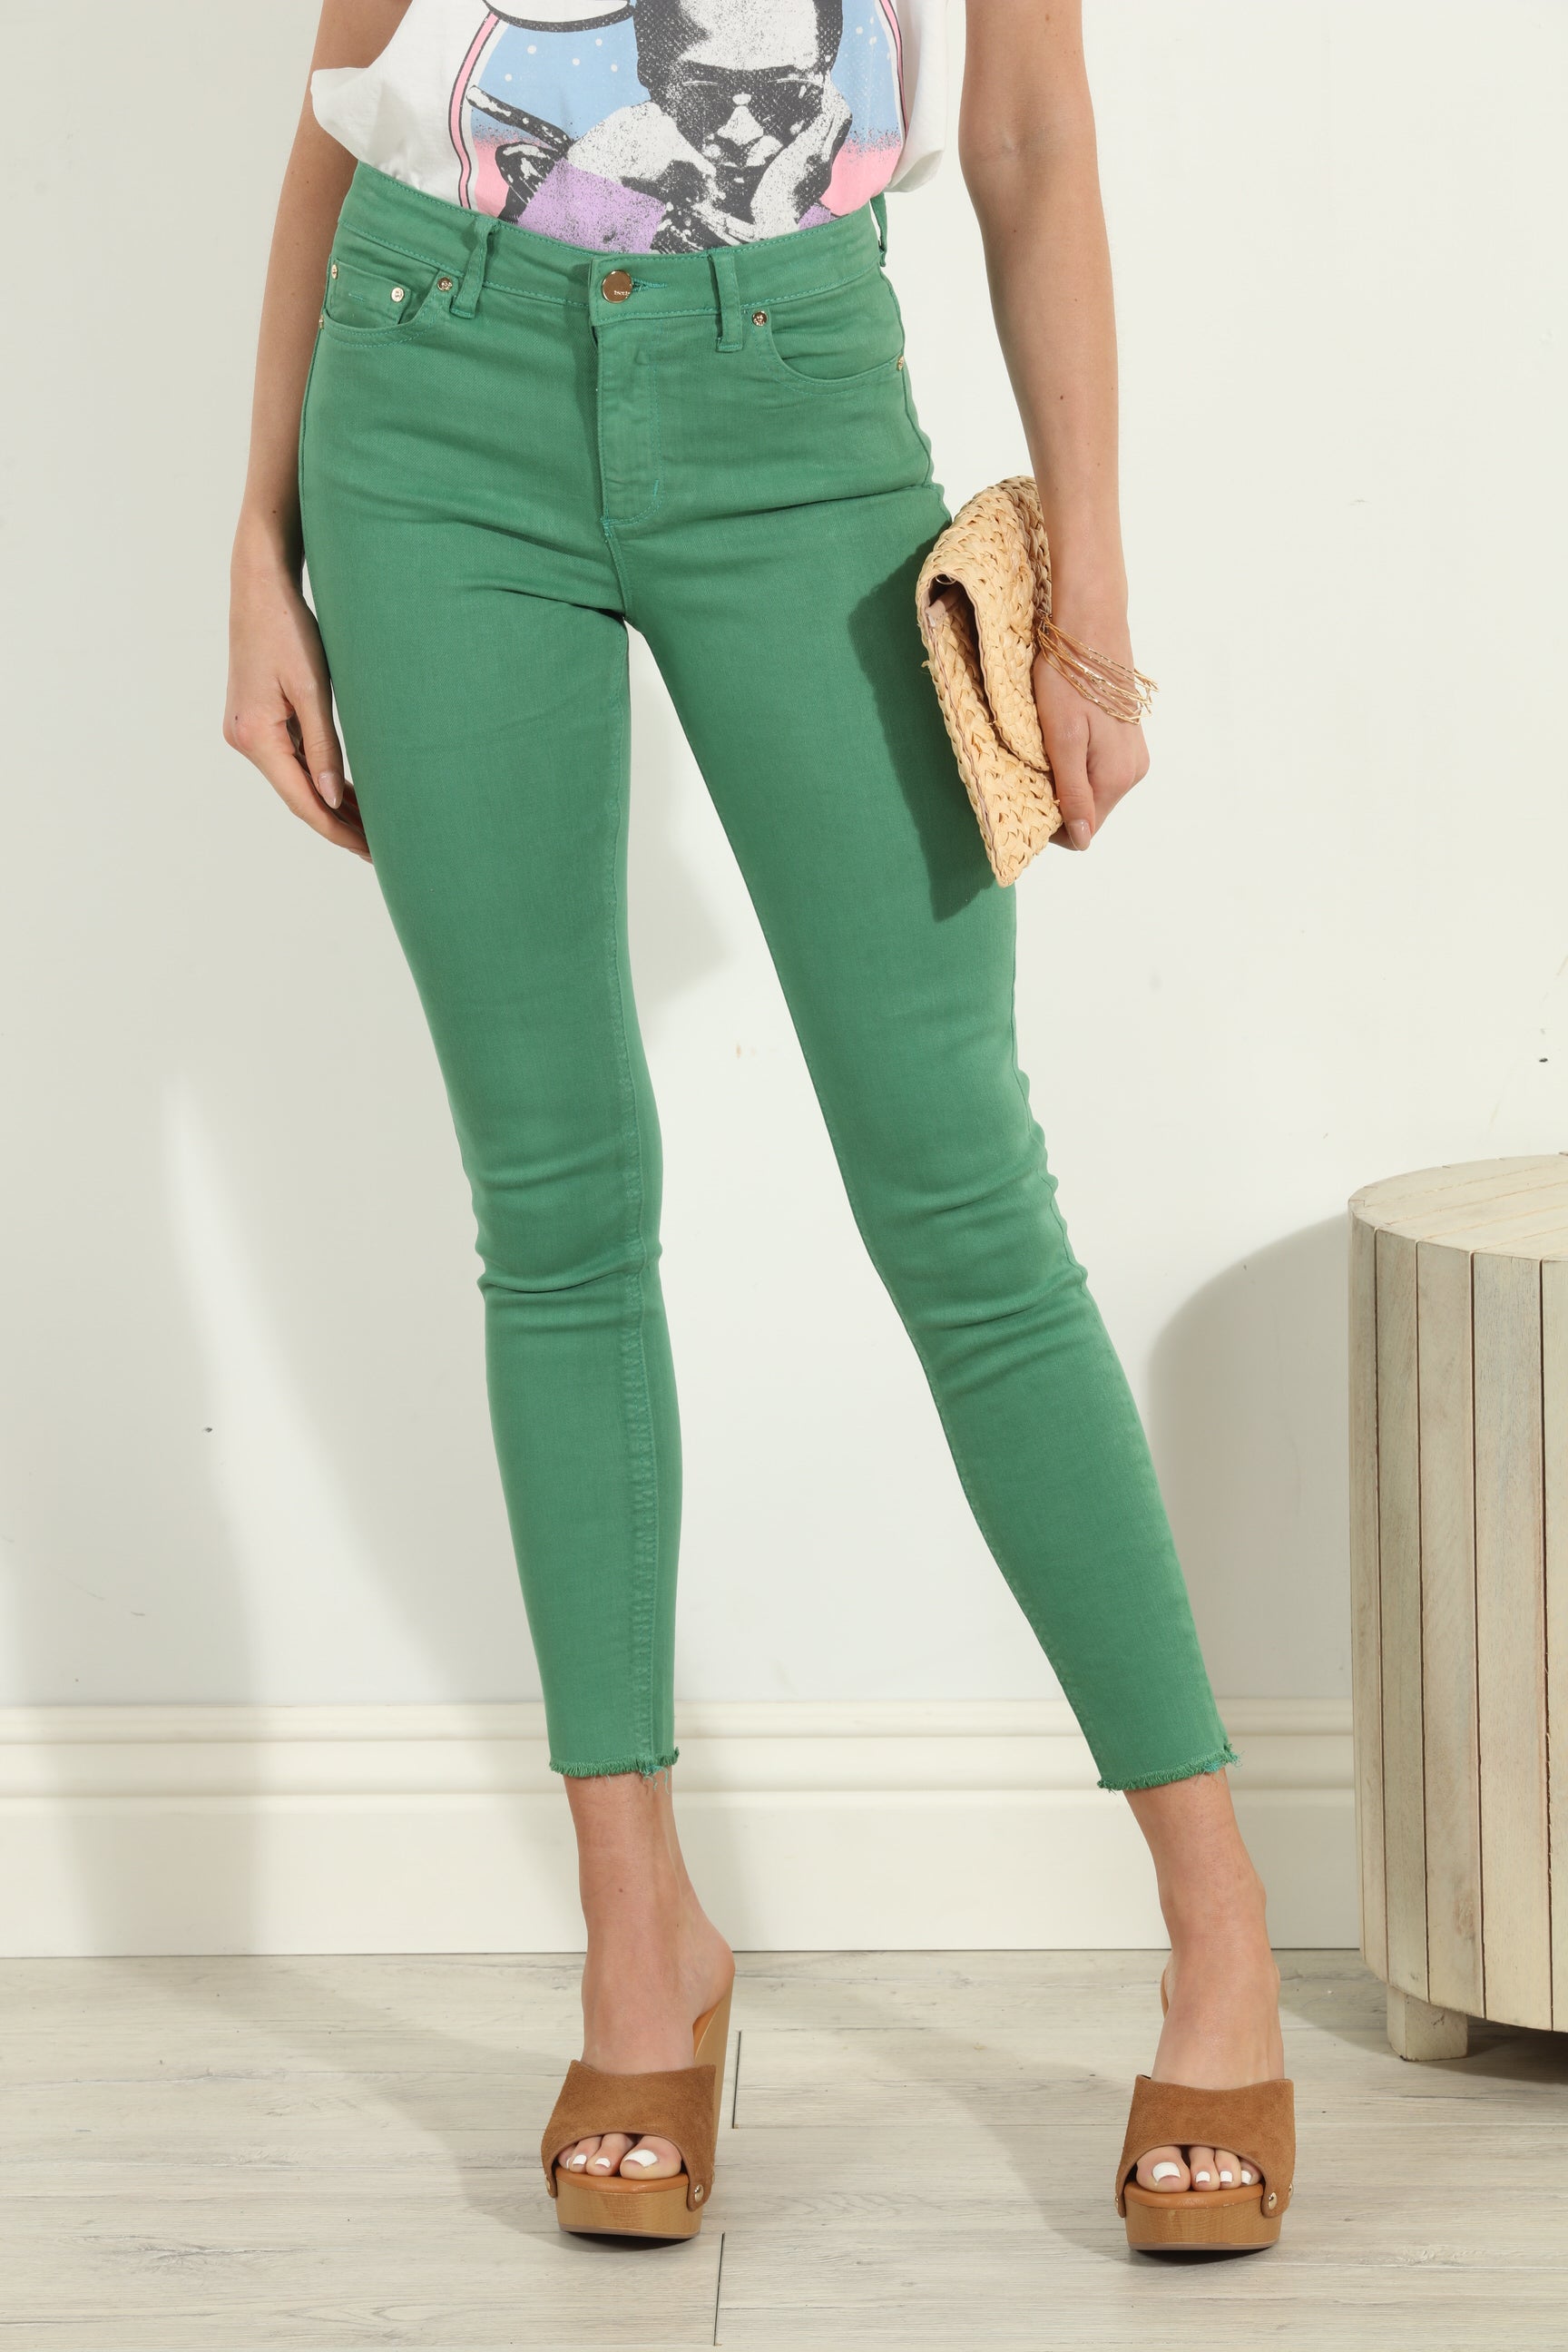 TRCTR Grass Green High Rise Cropped Skinny Jeans-FINAL SALE